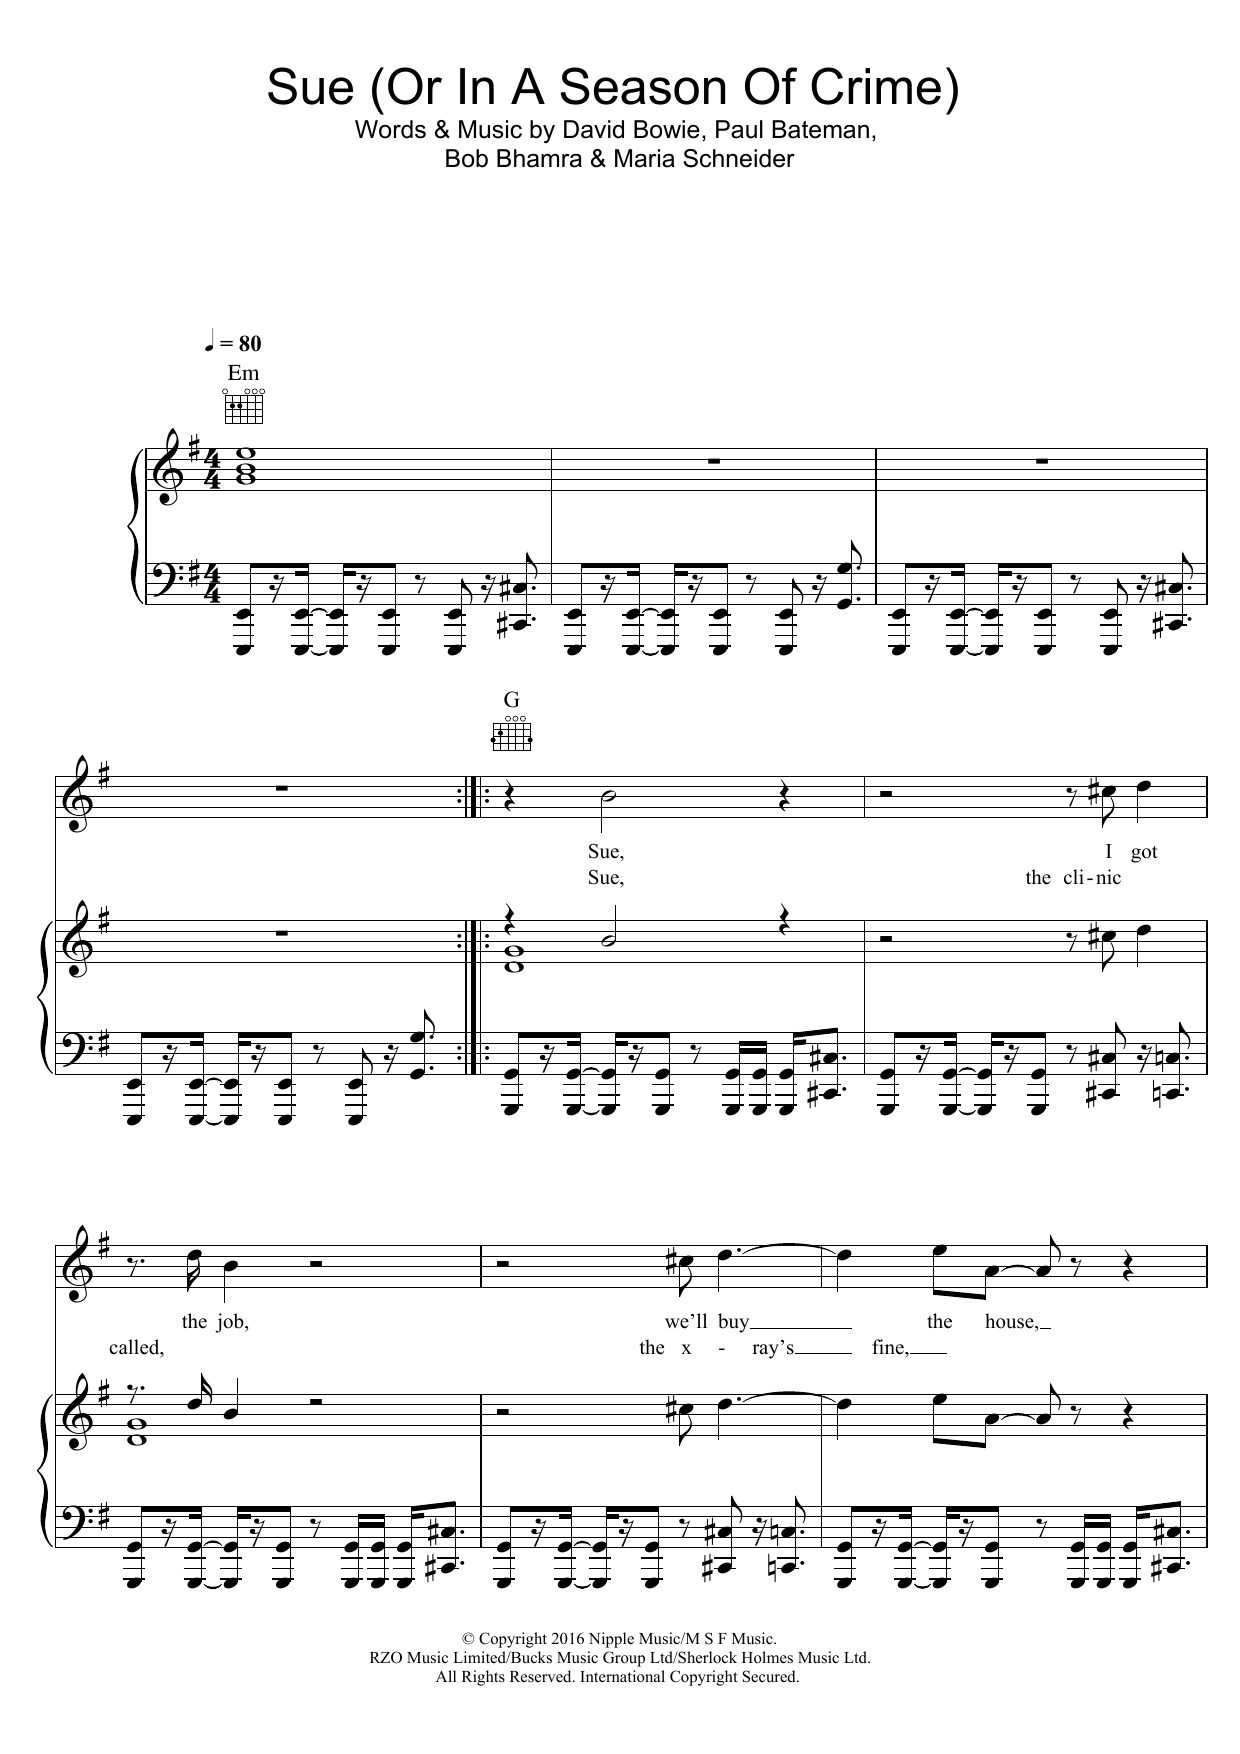 Download David Bowie Sue (Or In A Season Of Crime) Sheet Music